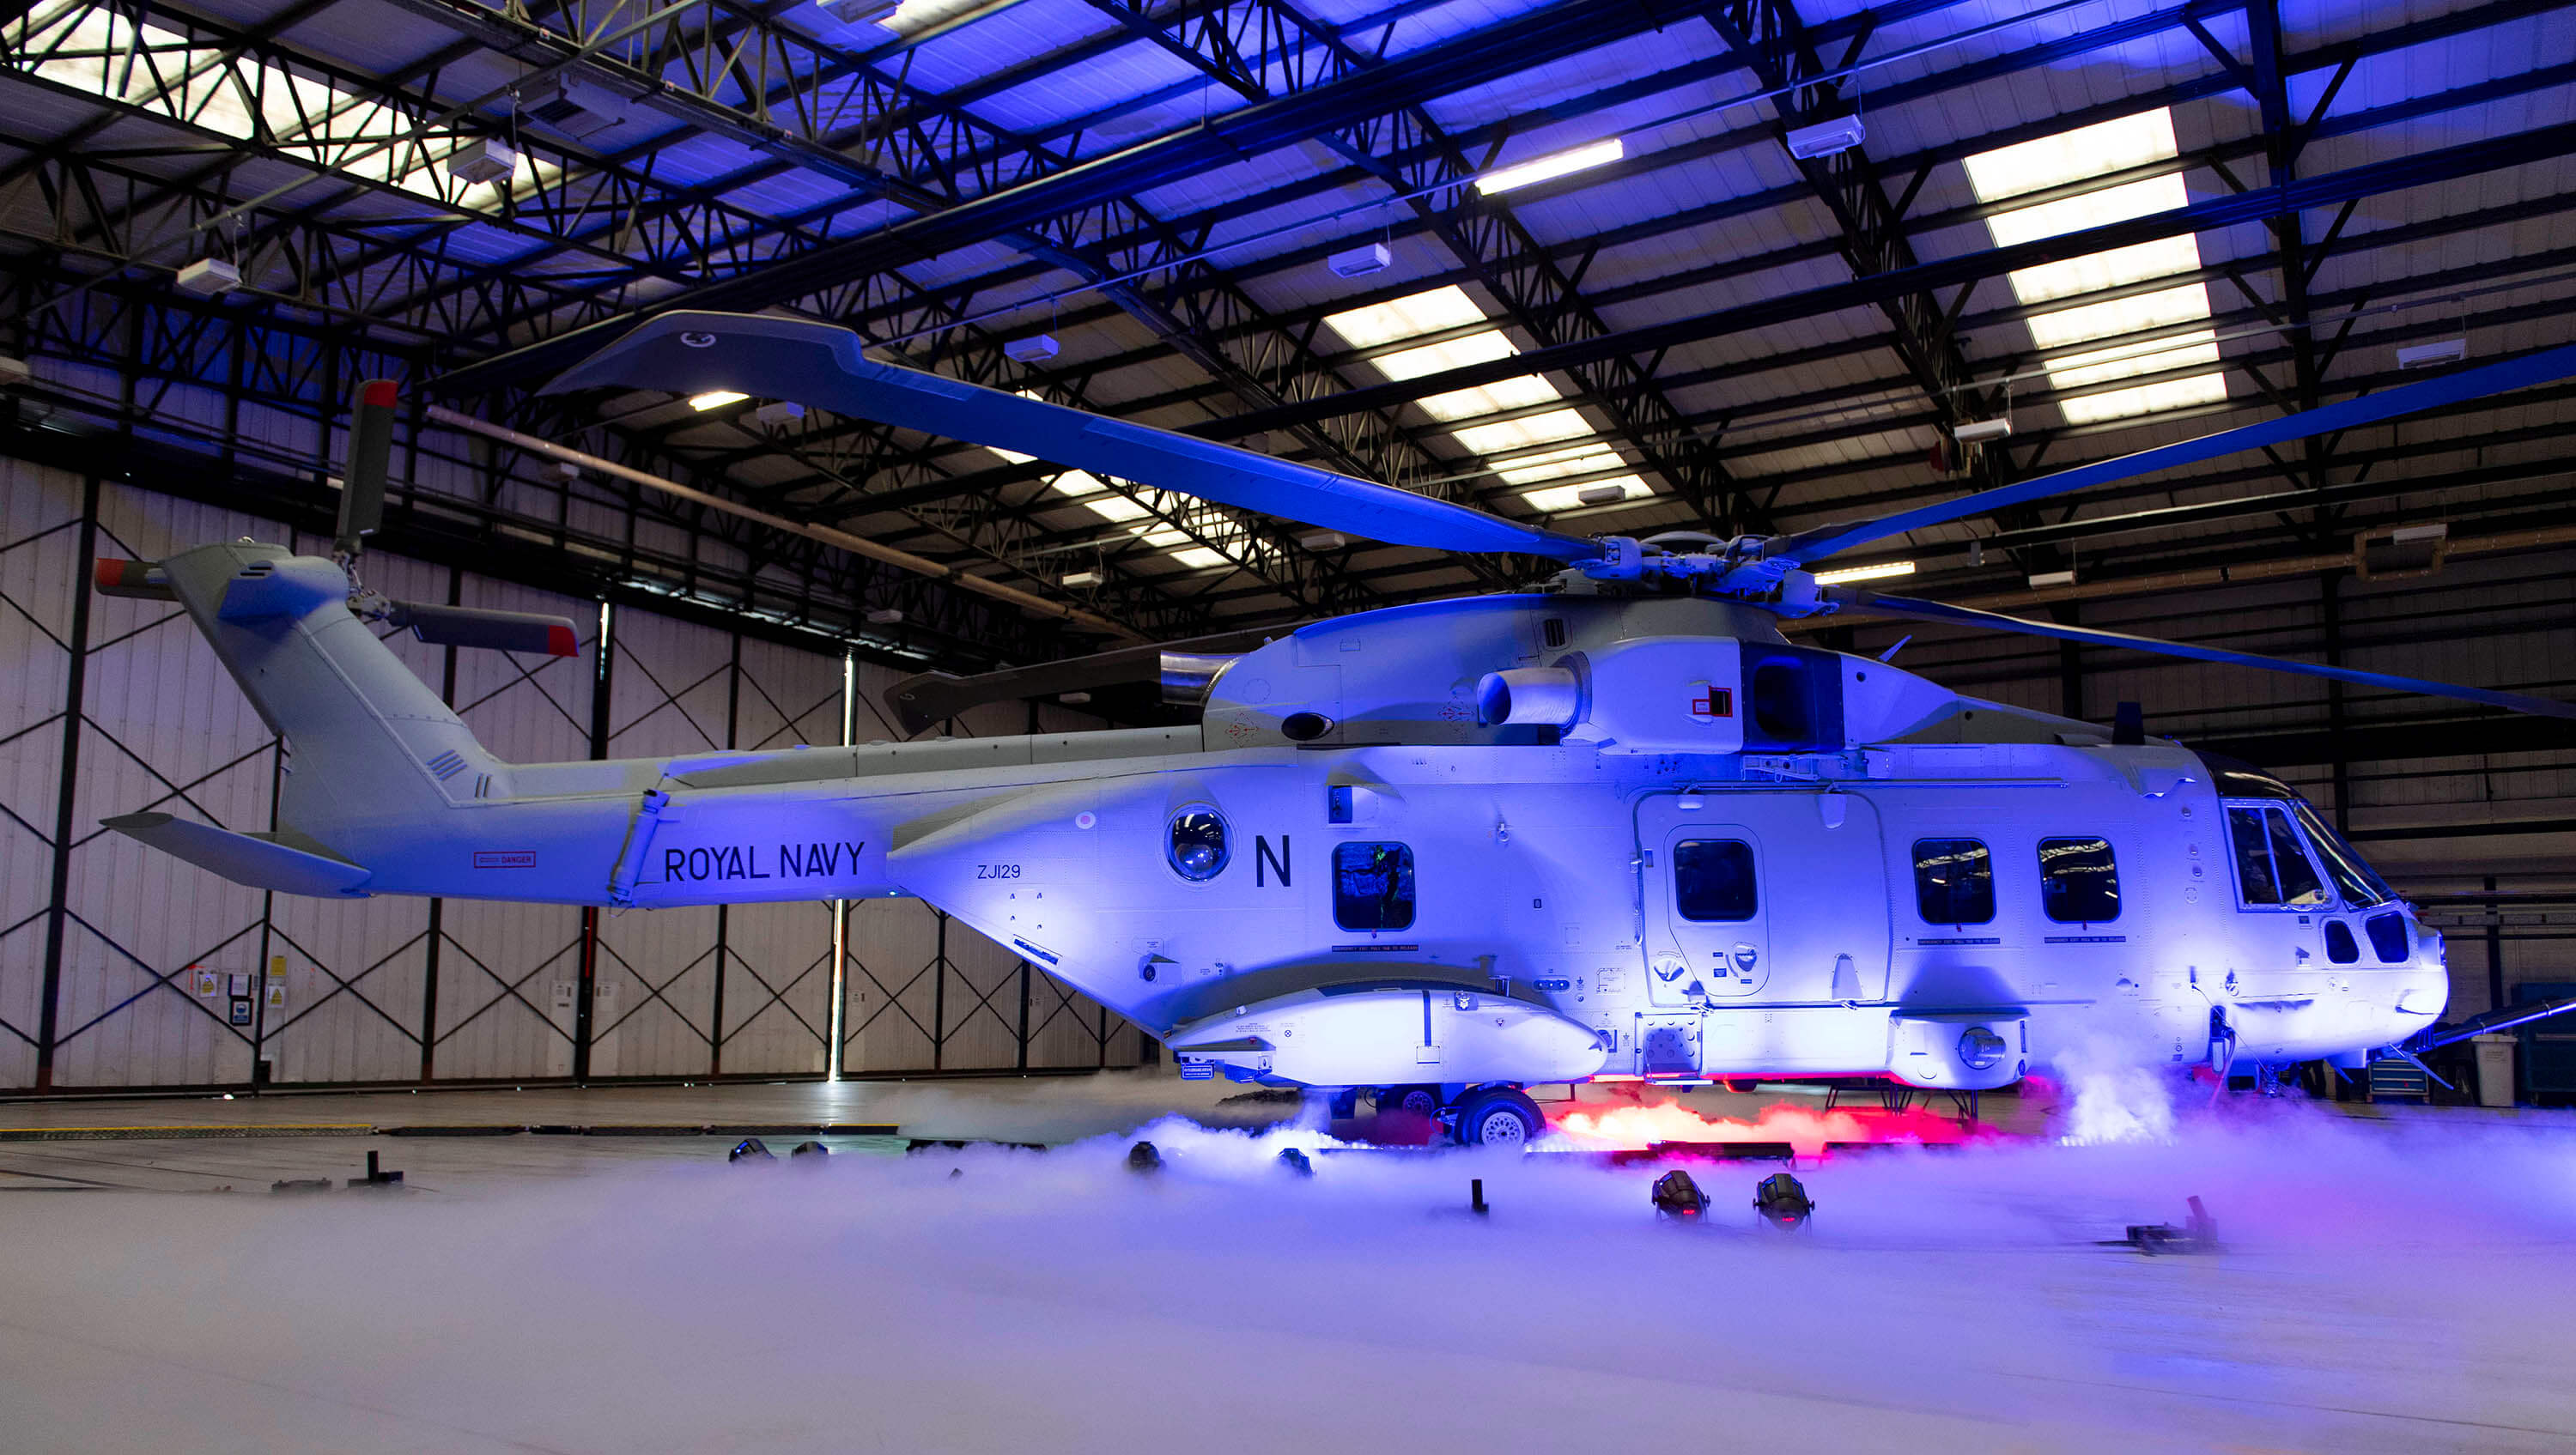 A helicopter lit up by a purple light in a hangar